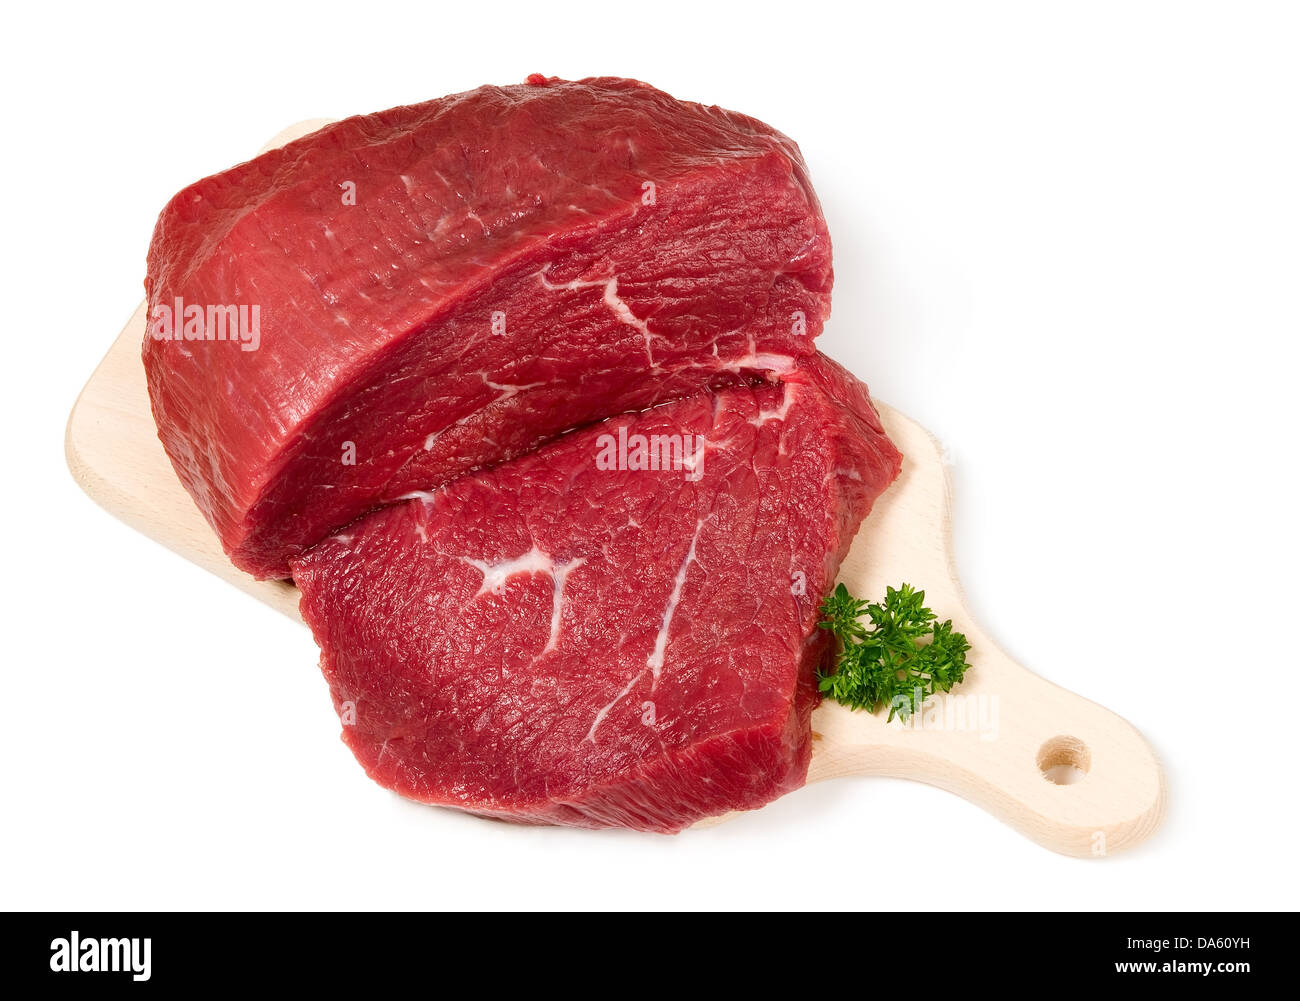 Raw sliced meat placed on cutting board, food concept Stock Photo